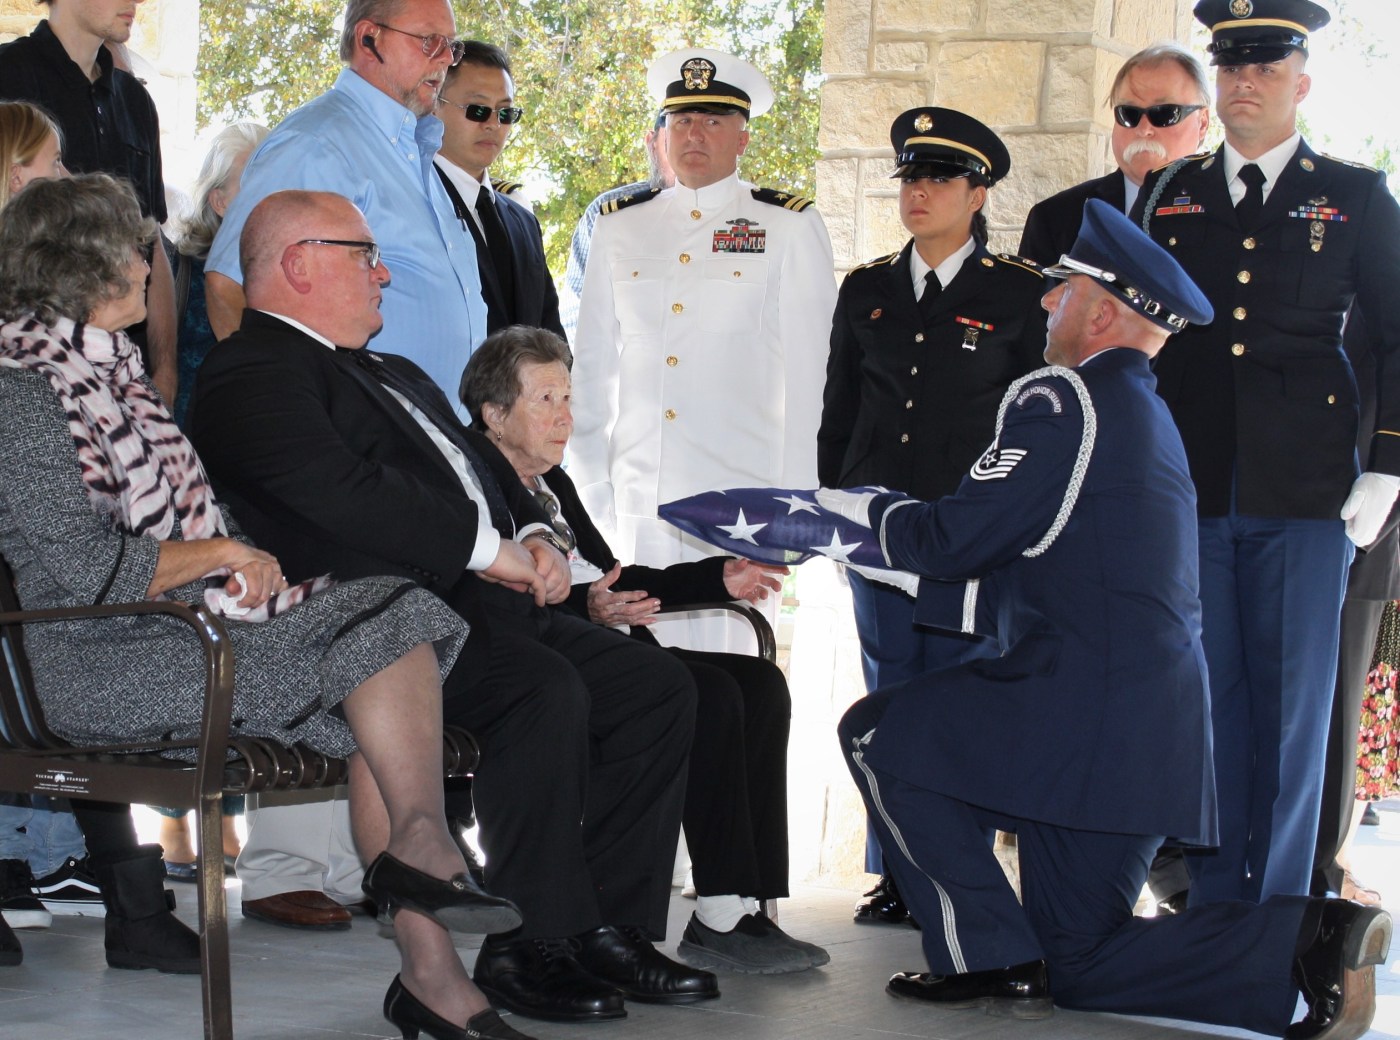 Veterans posthumously honored for donating their bodies to research